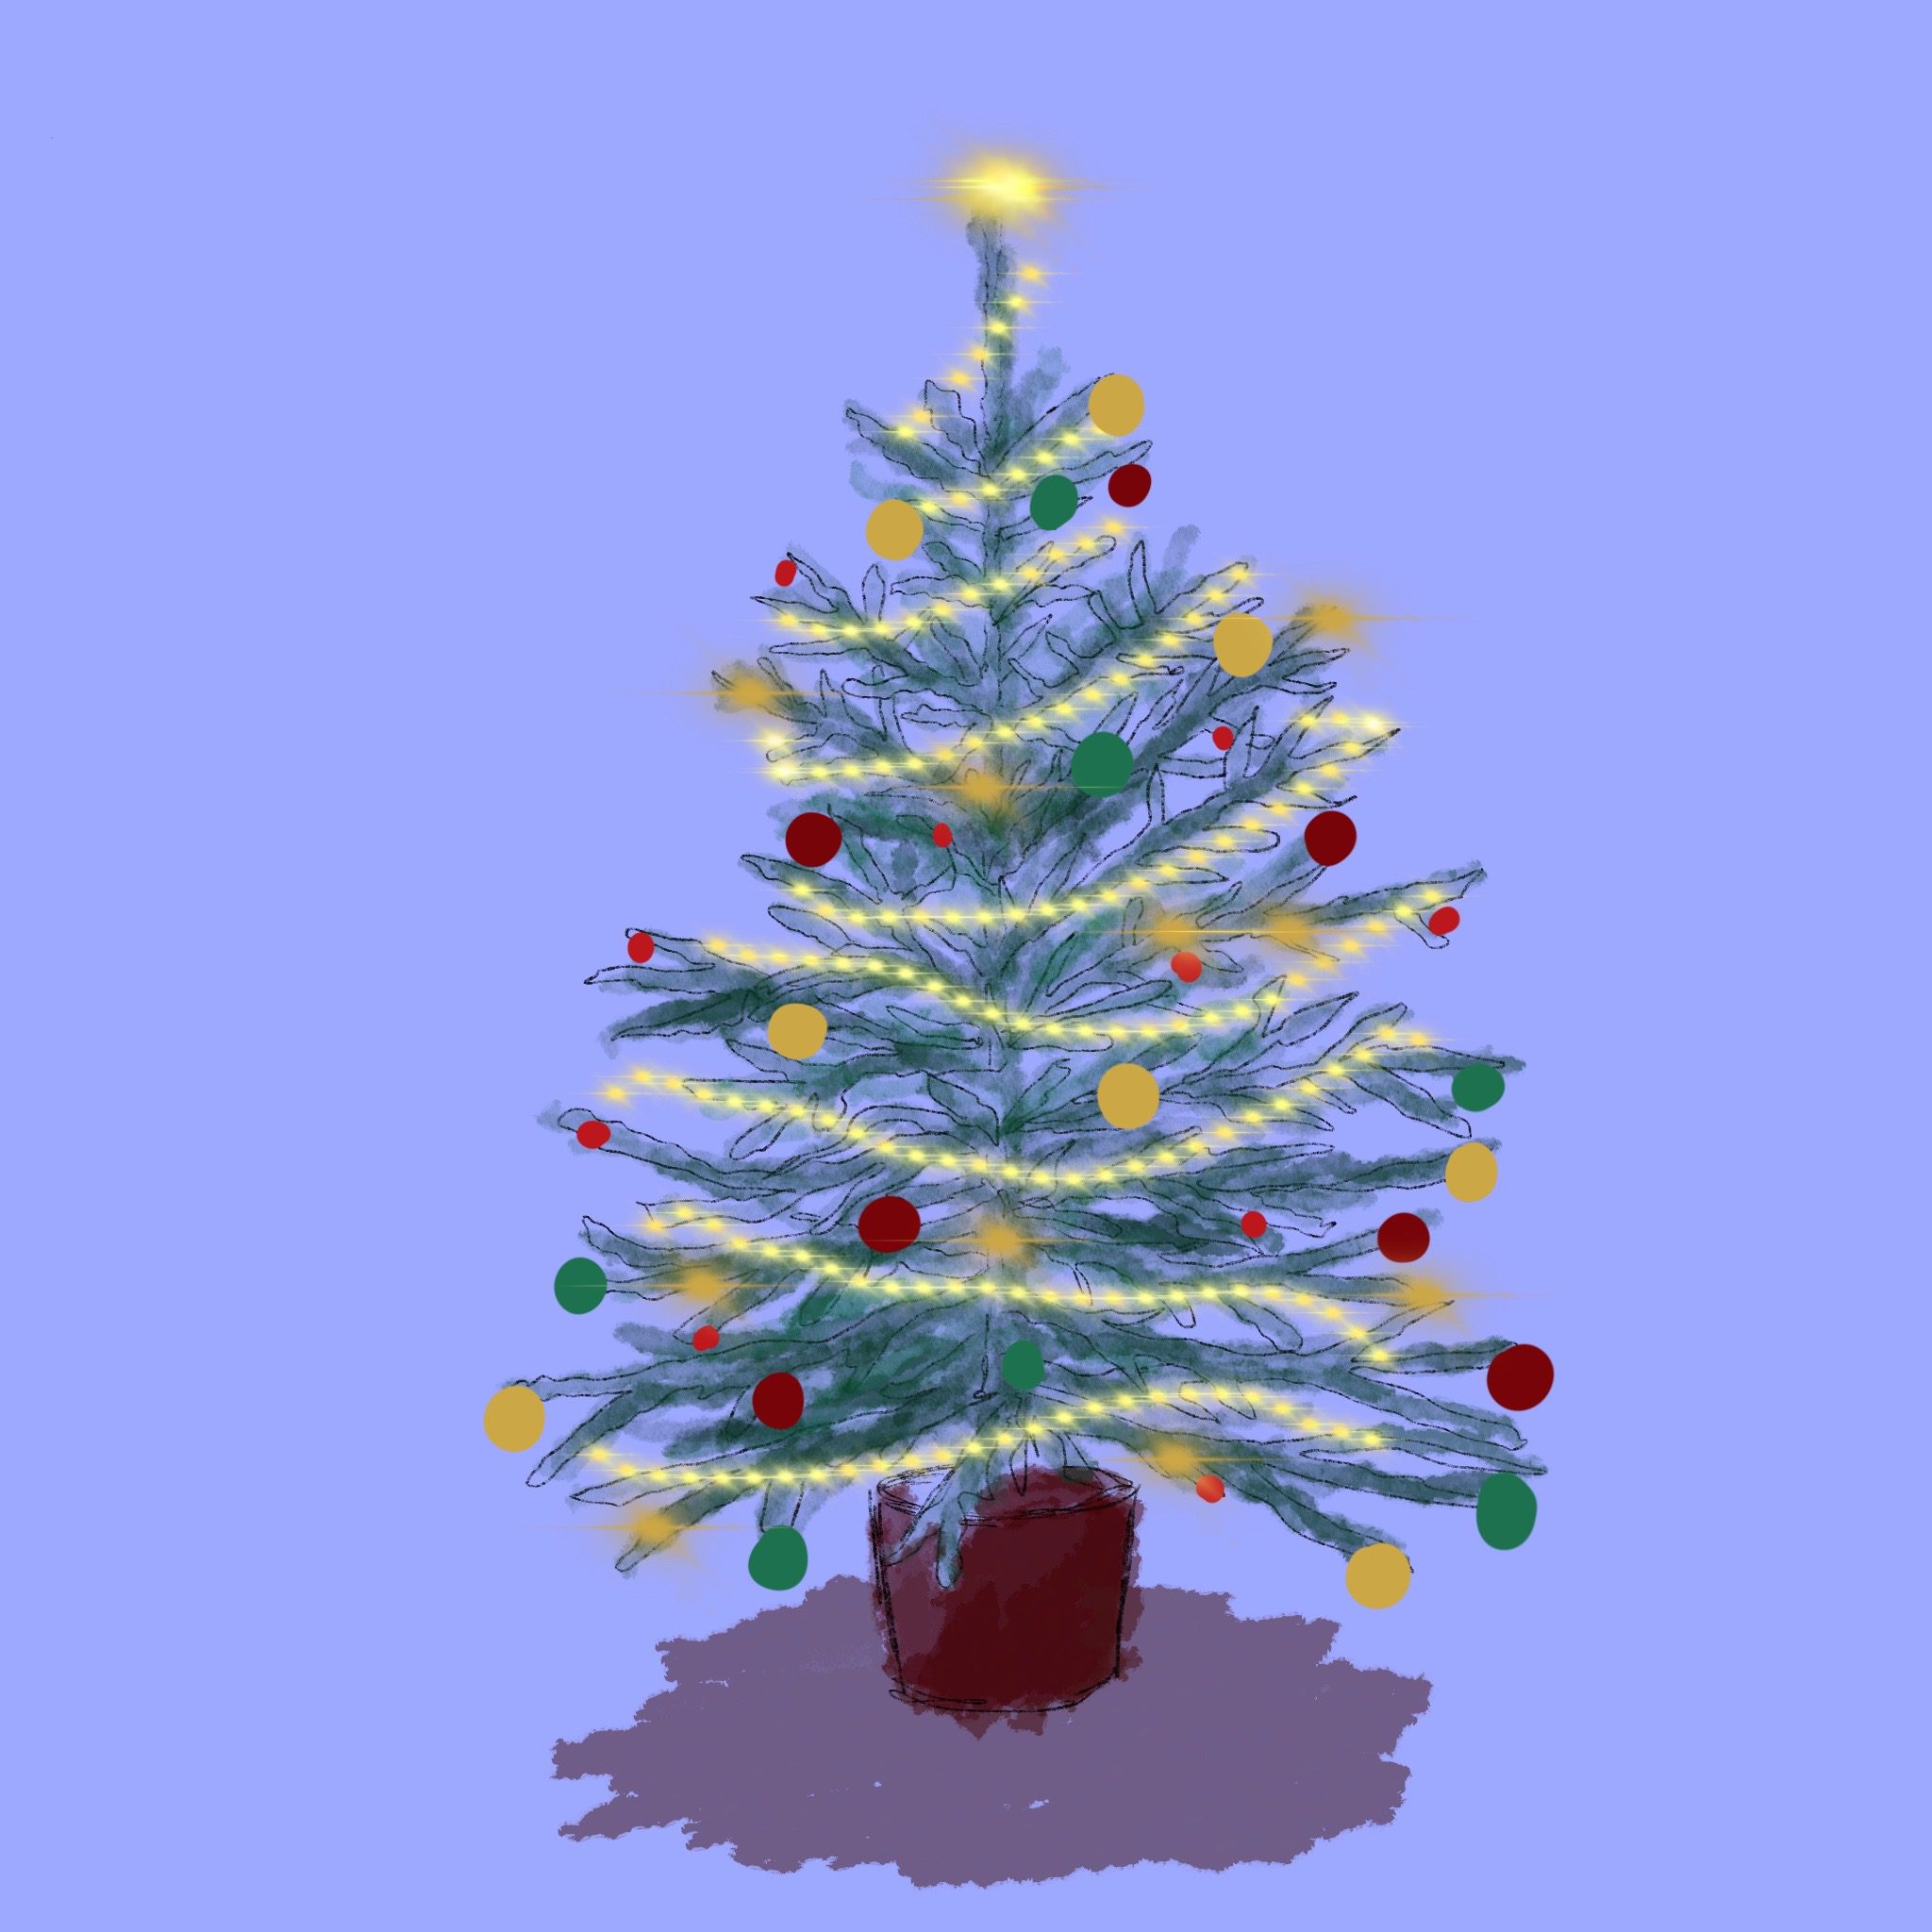 An illustration of a Christmas tree covered in silver tinsel, and yellow and red lights.